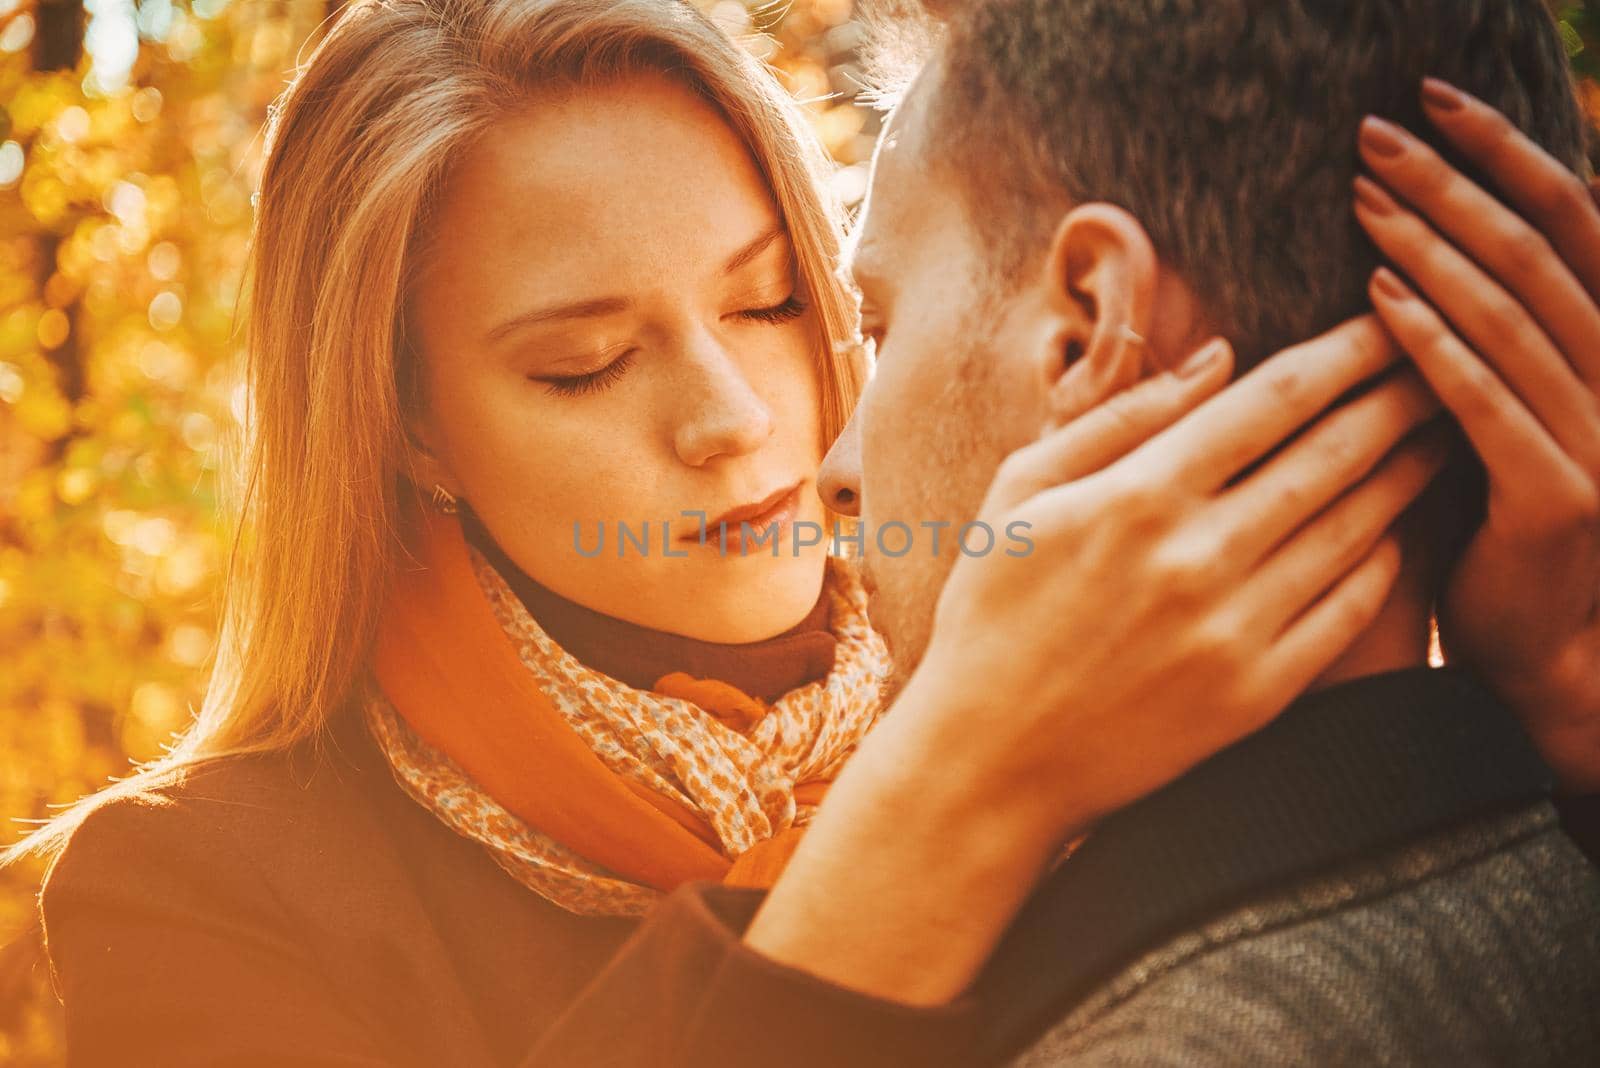 Young beautiful woman with closed eyes embraces a man in autumn park, tenderness scene